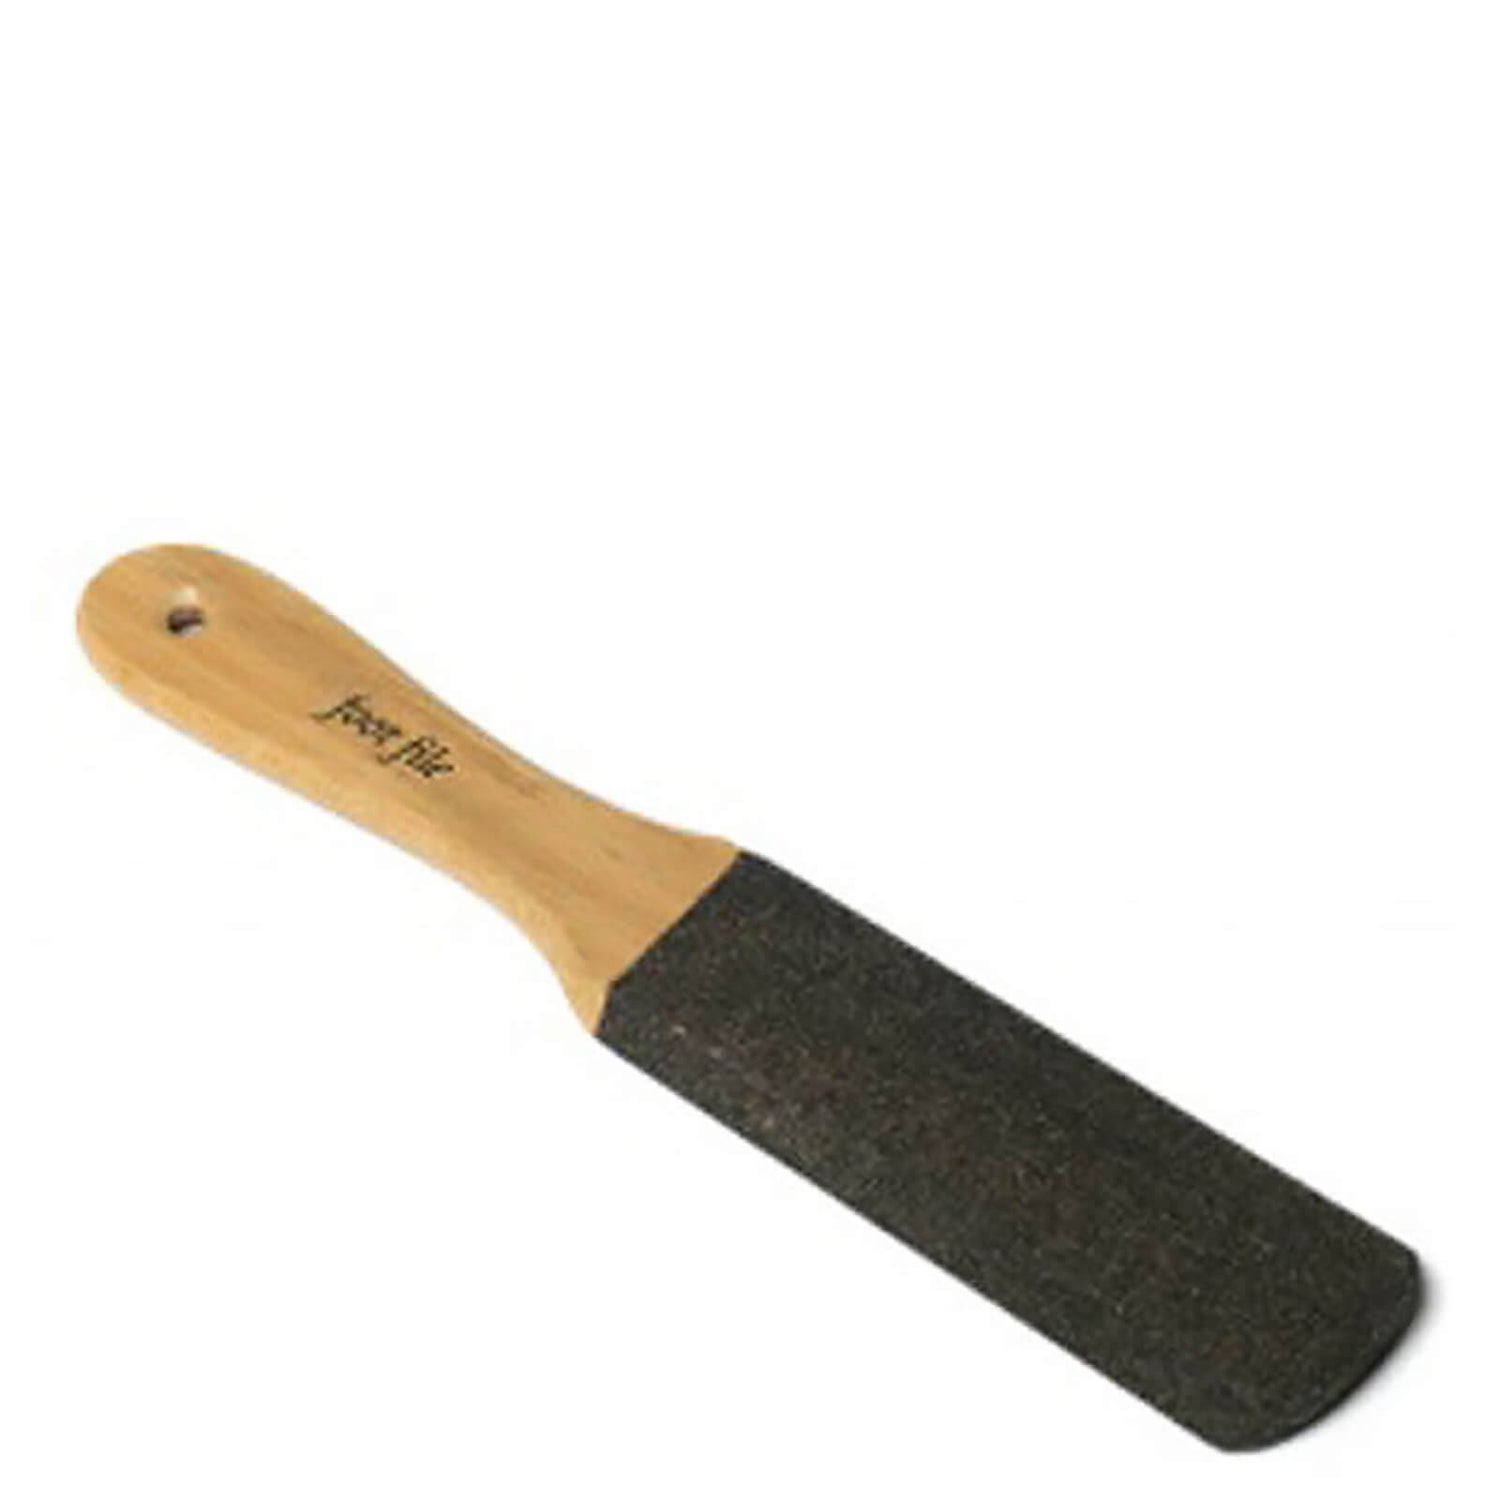 Hydrea London - Wooden Foot File With Natural Pumice